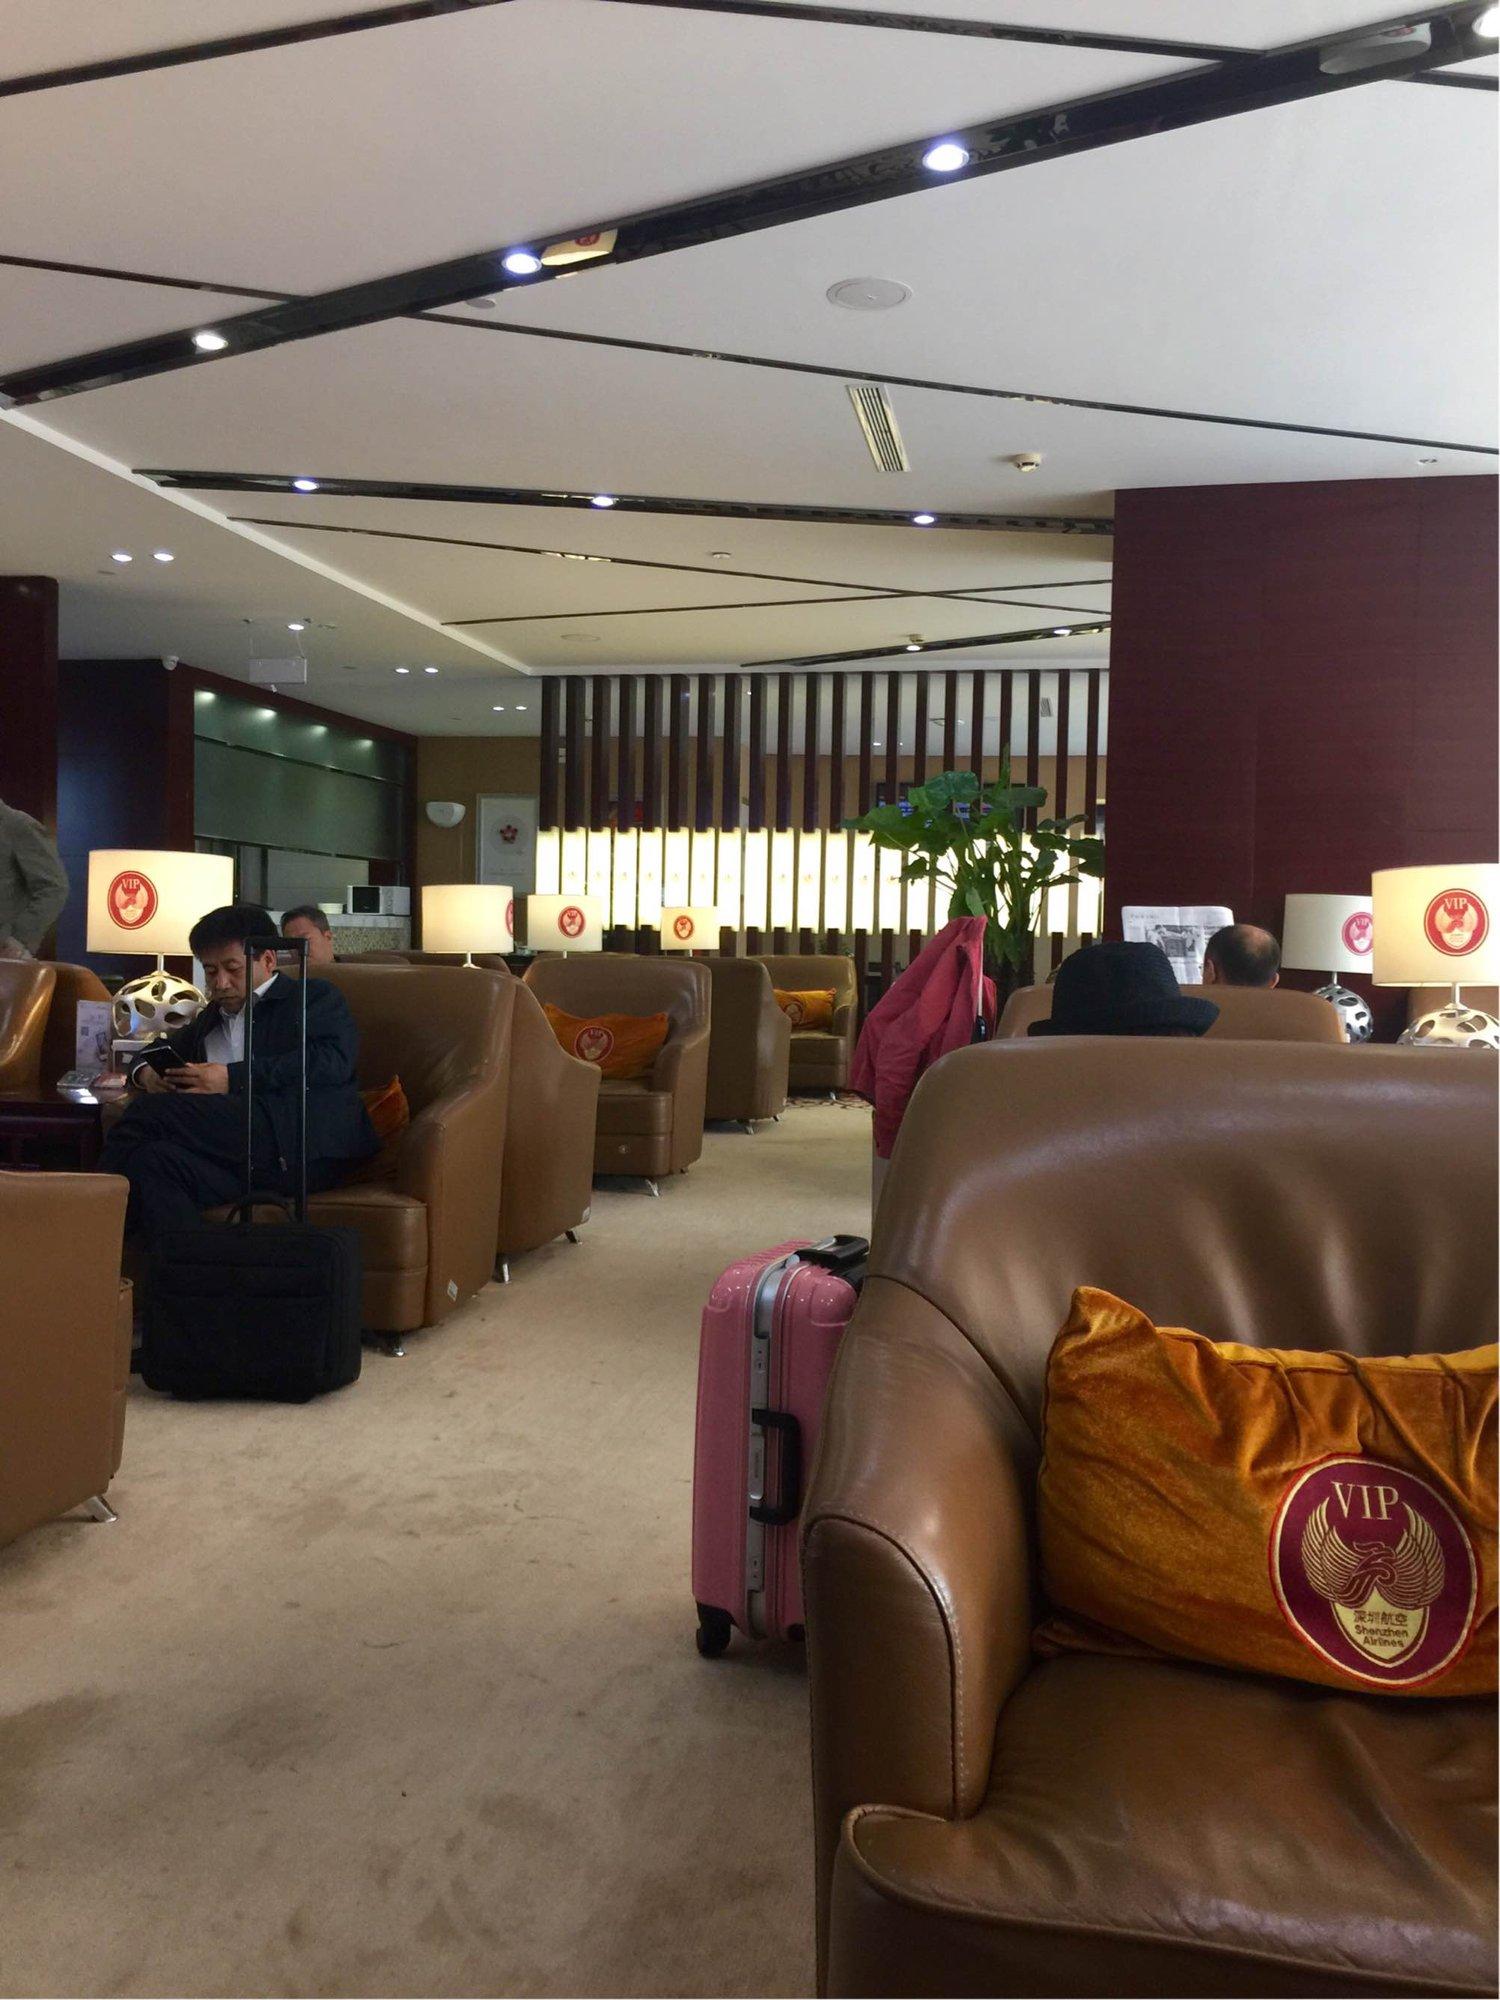 Shenzhen Airlines King Lounge image 1 of 1